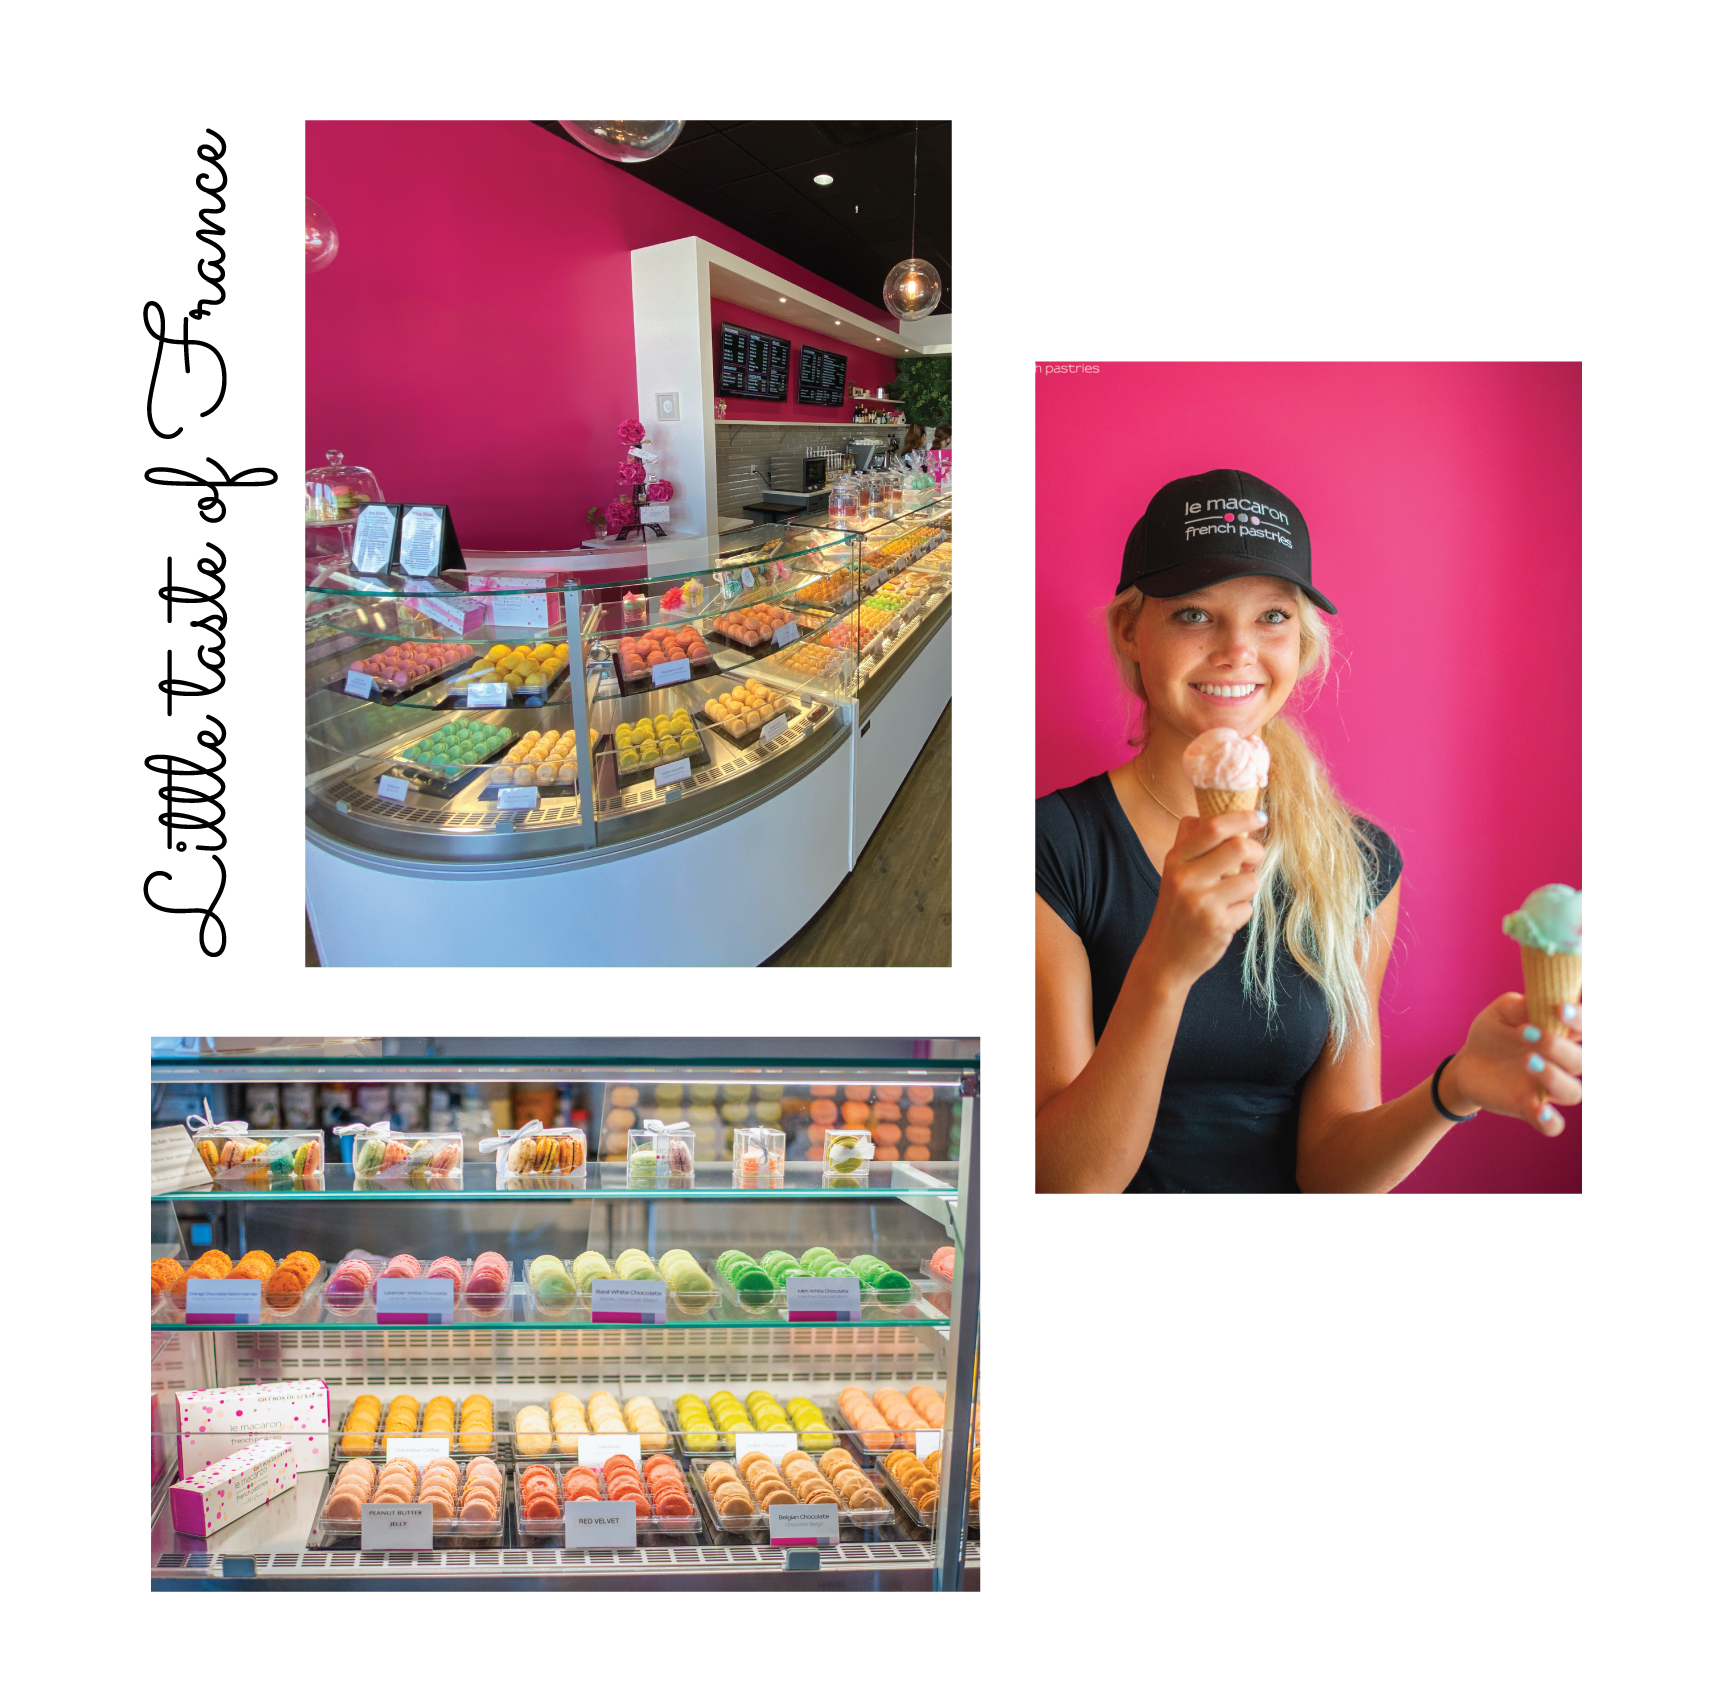 Little taste of France: woman smiling and holding ice cream cones, and macaron display cases